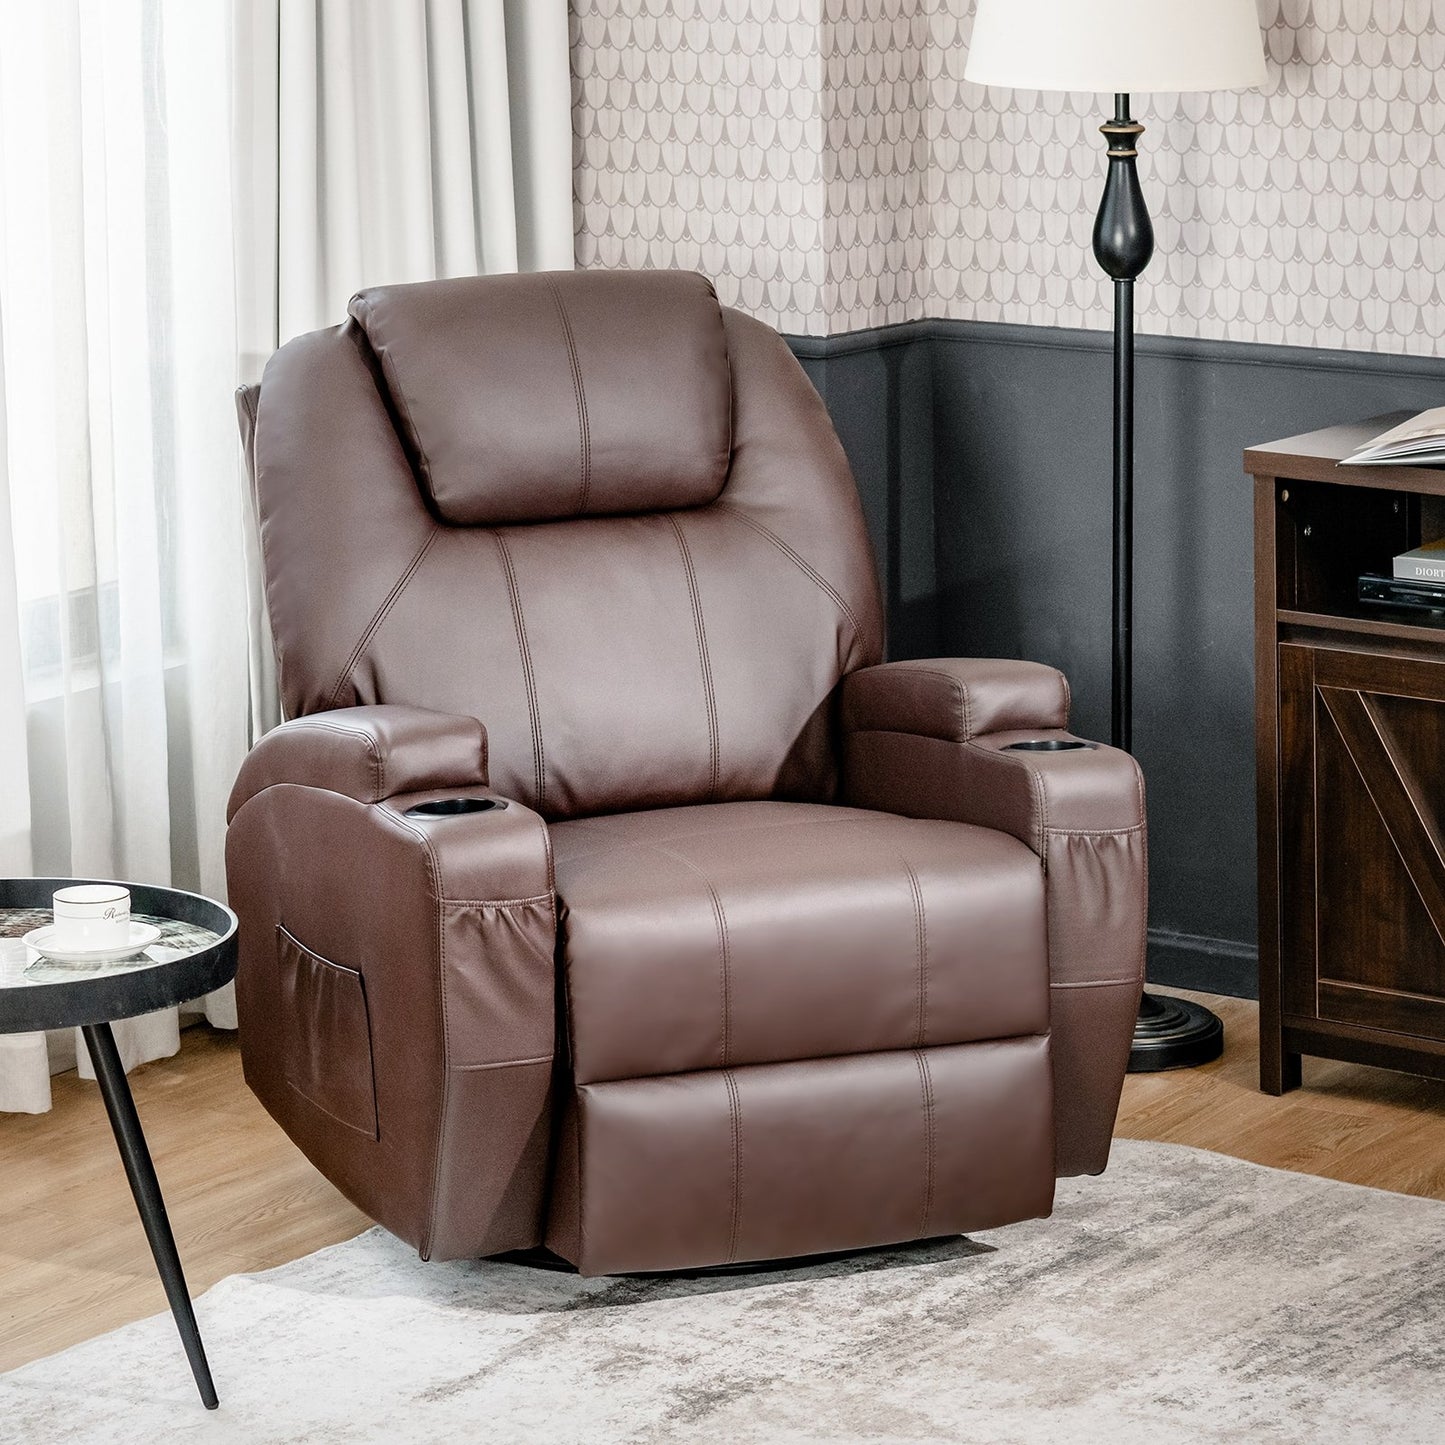 360-Degree Swivel Massage Recliner Chair with Remote Control for Home, Brown